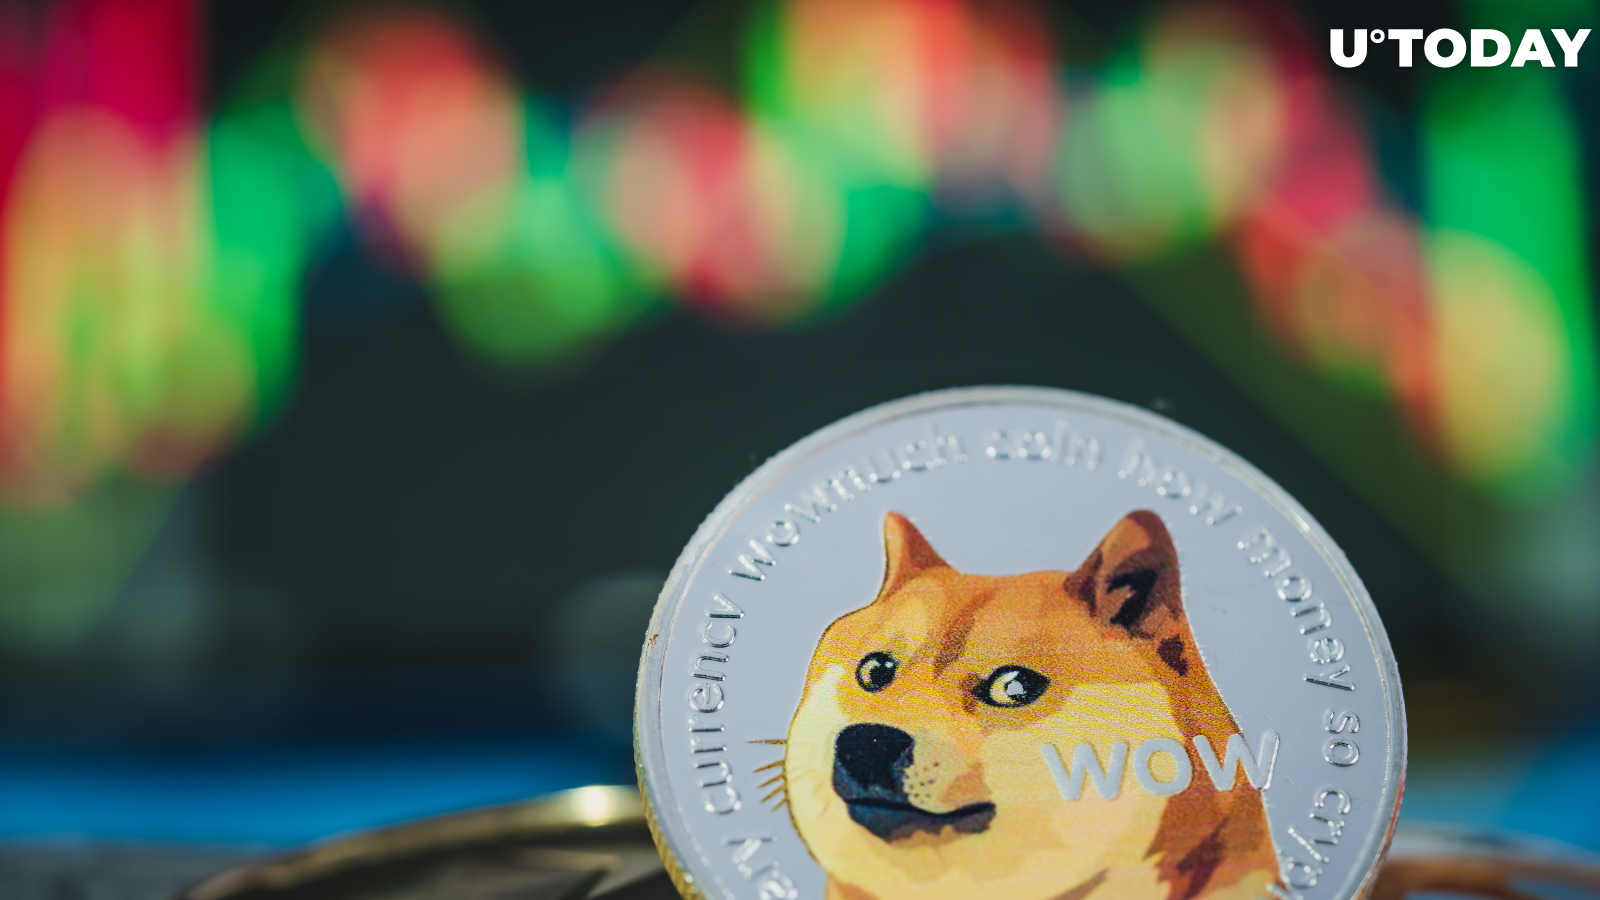 Dogecoin’s Market Cap Grows to $90 Billion, But Spencer Bogart Warns It Has No Real Users